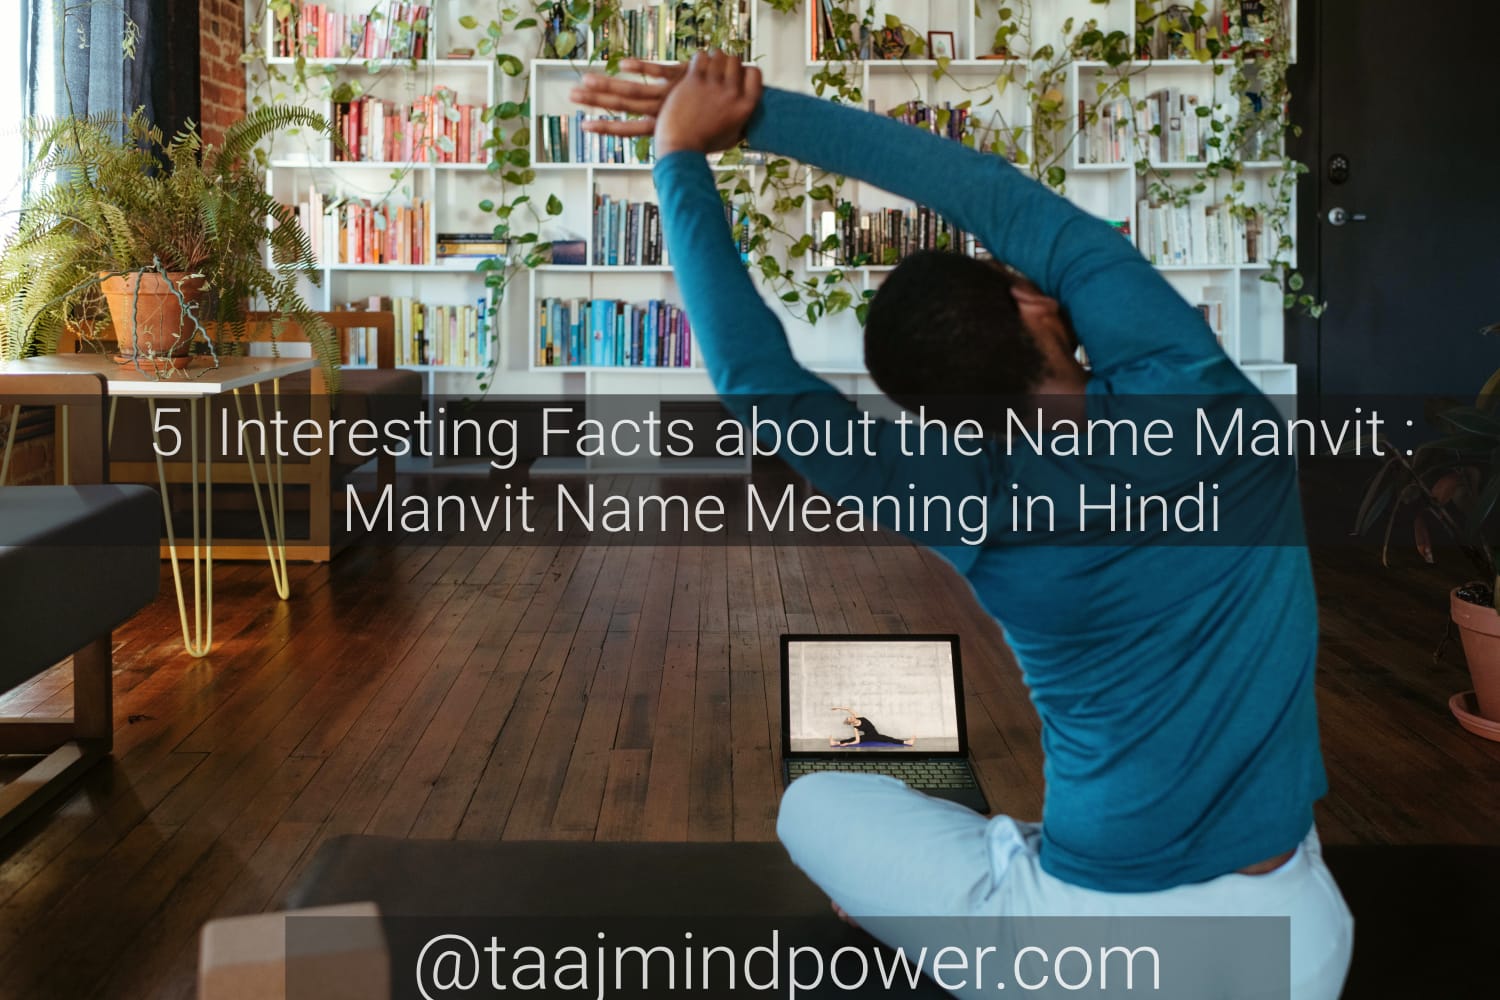 Manvit Name Meaning in Hindi